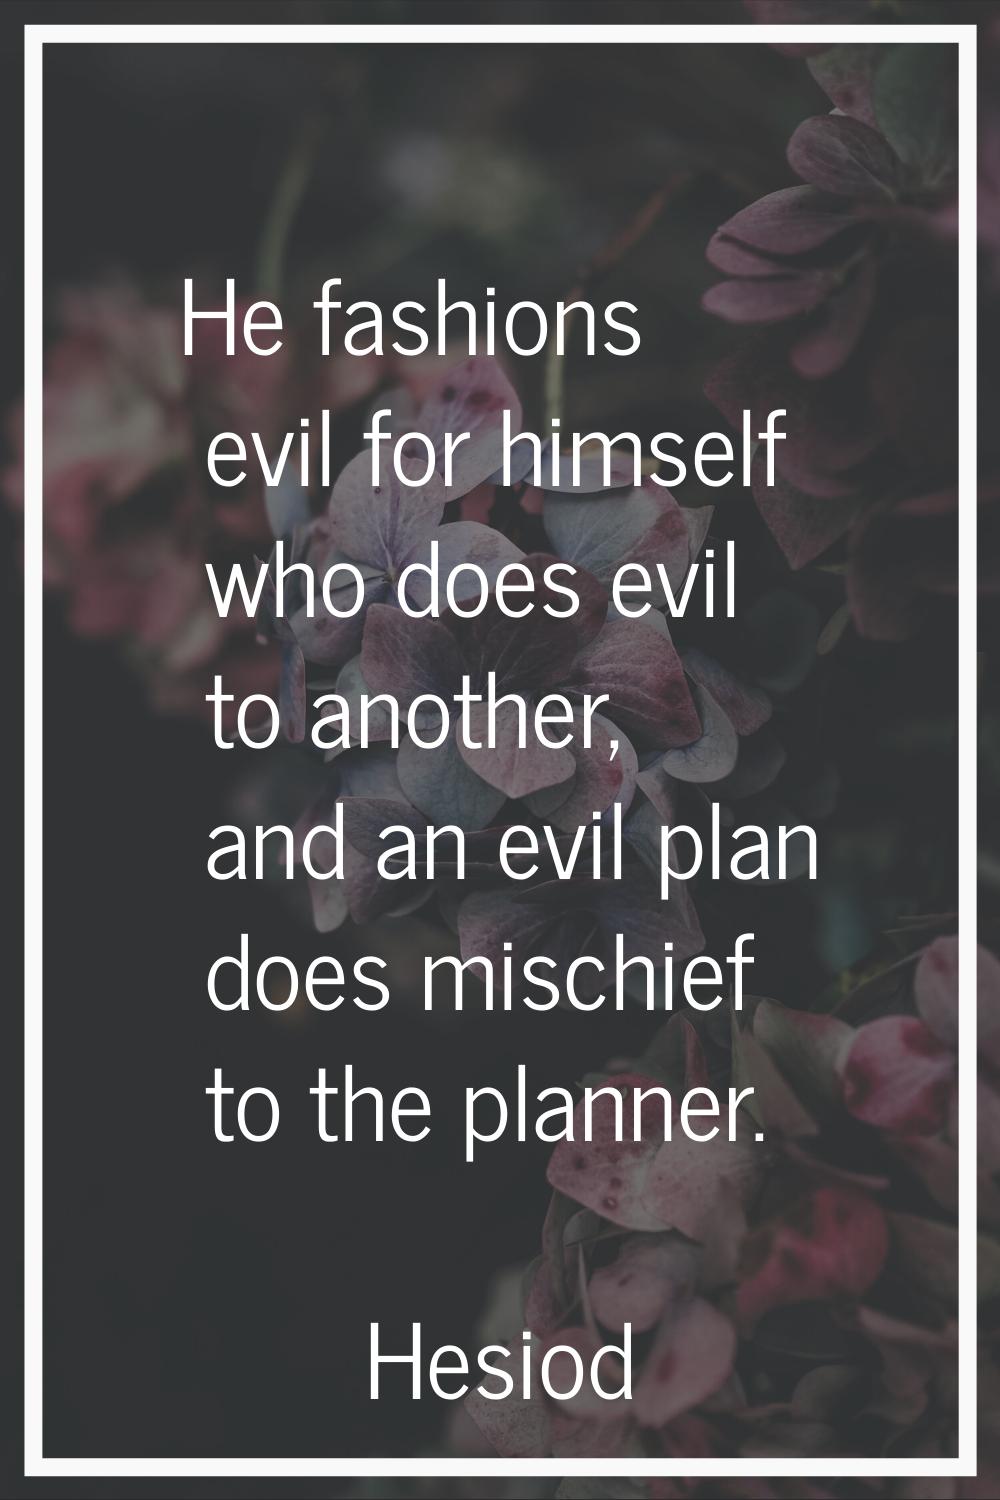 He fashions evil for himself who does evil to another, and an evil plan does mischief to the planne